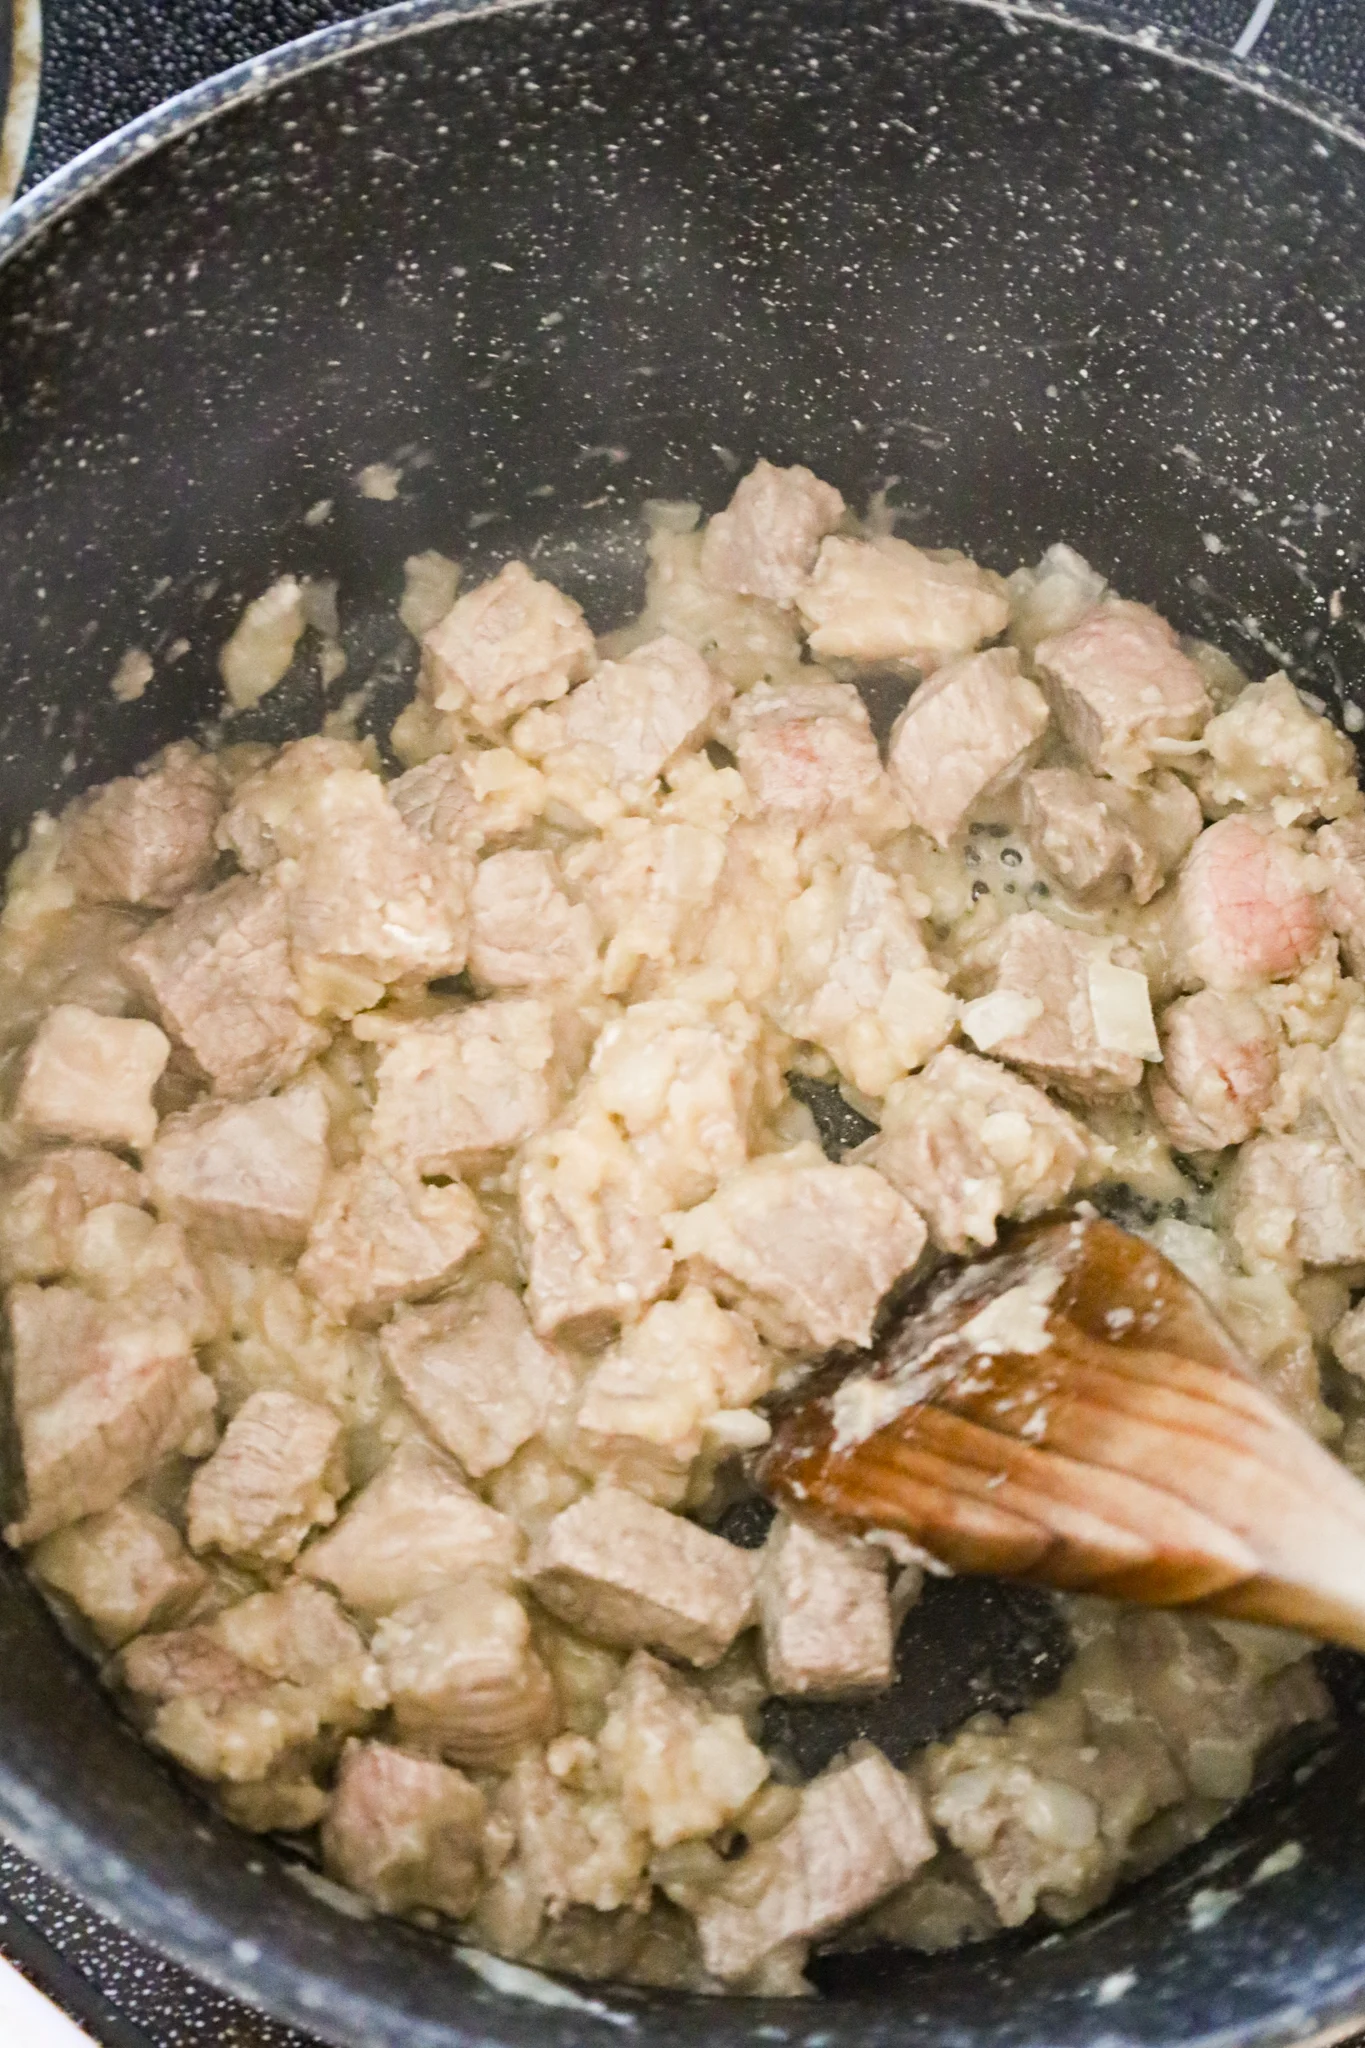 steak chunks coated in flour mixture cooking in a pot